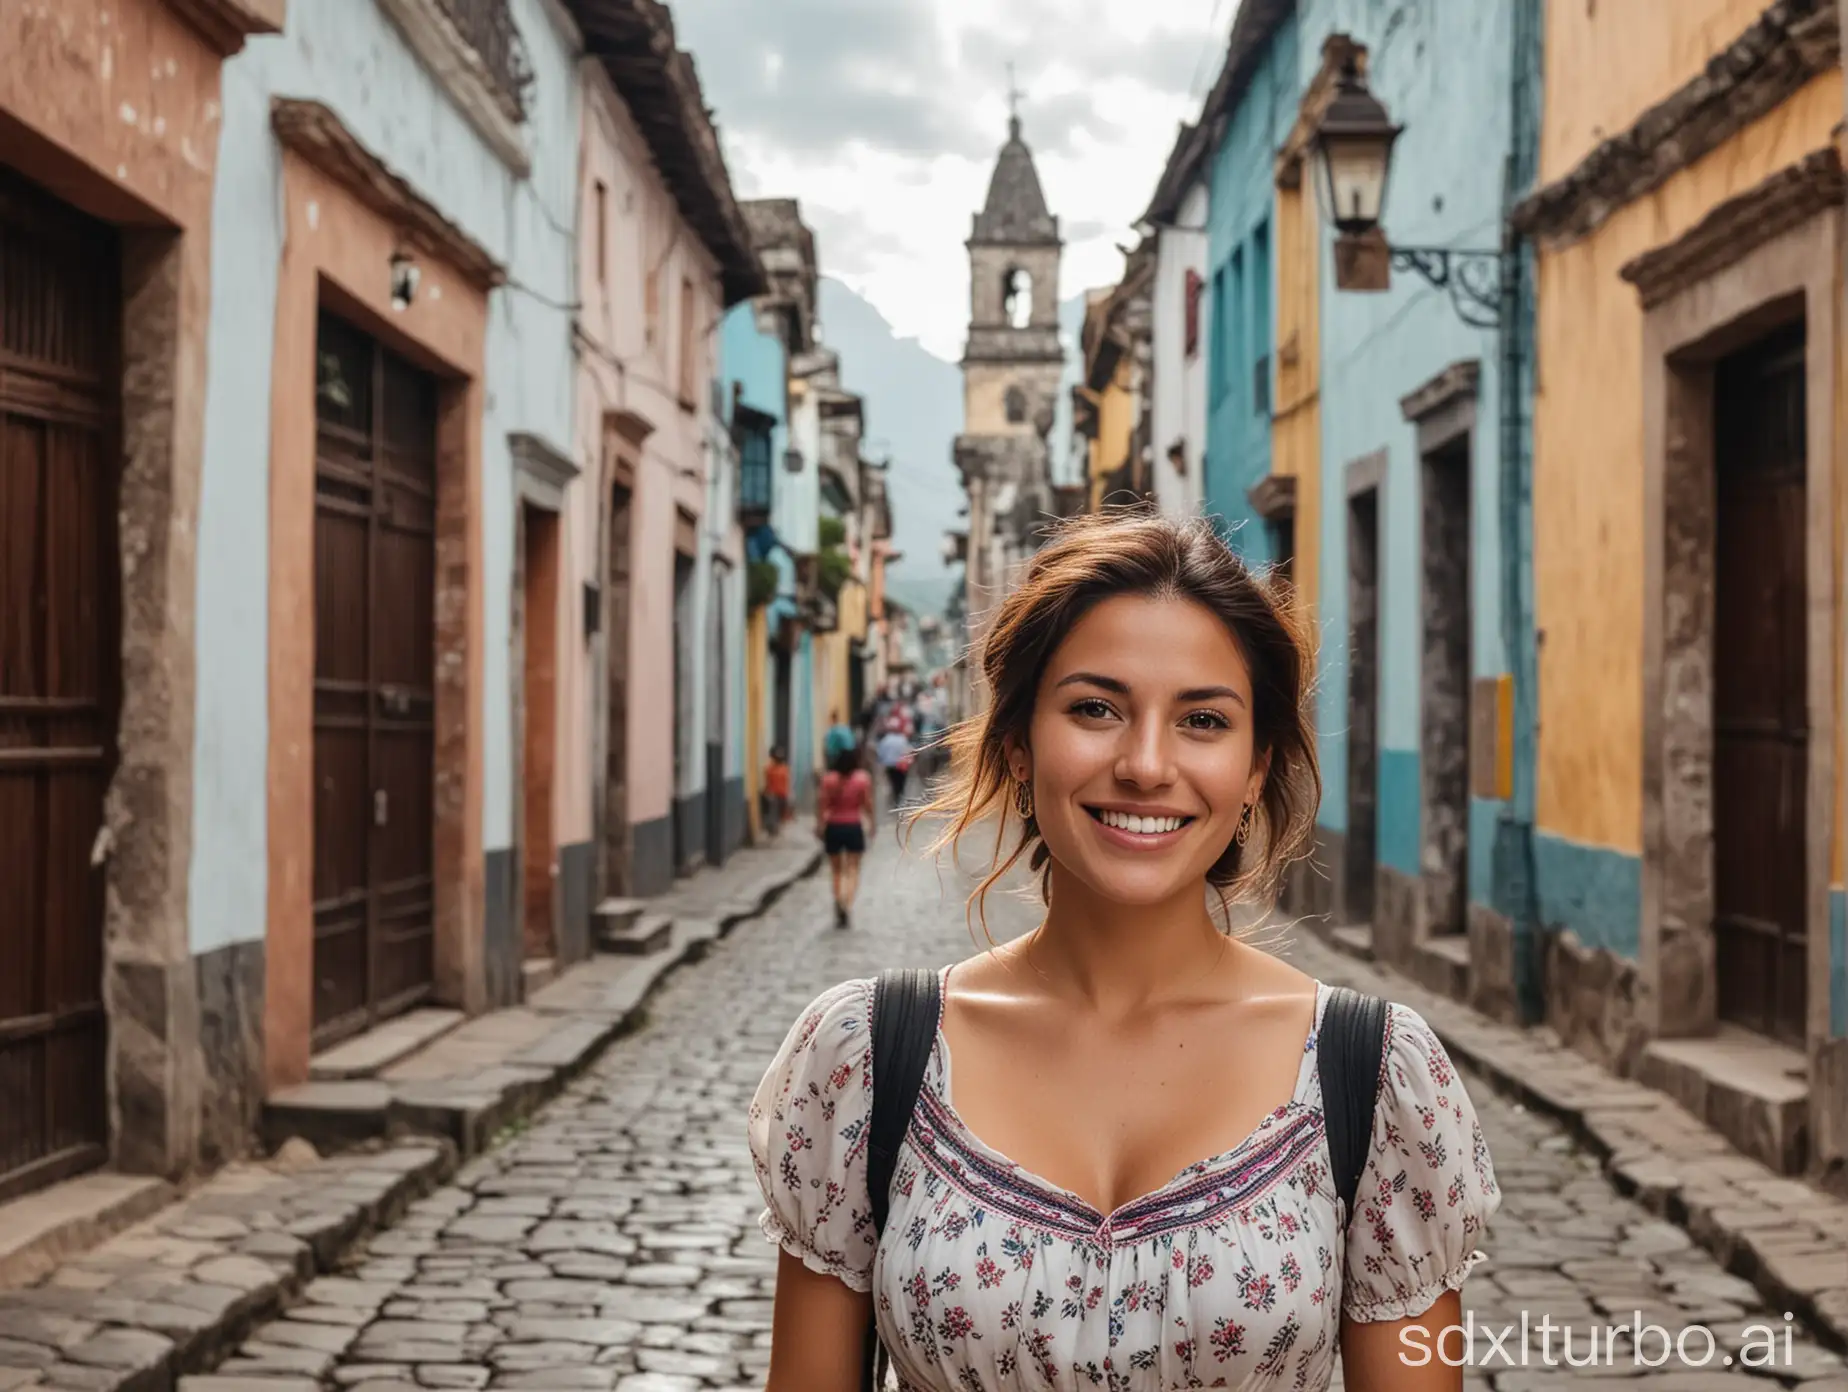 realistic pretty and fit woman in Guatemala historic center walking to the camera smiling